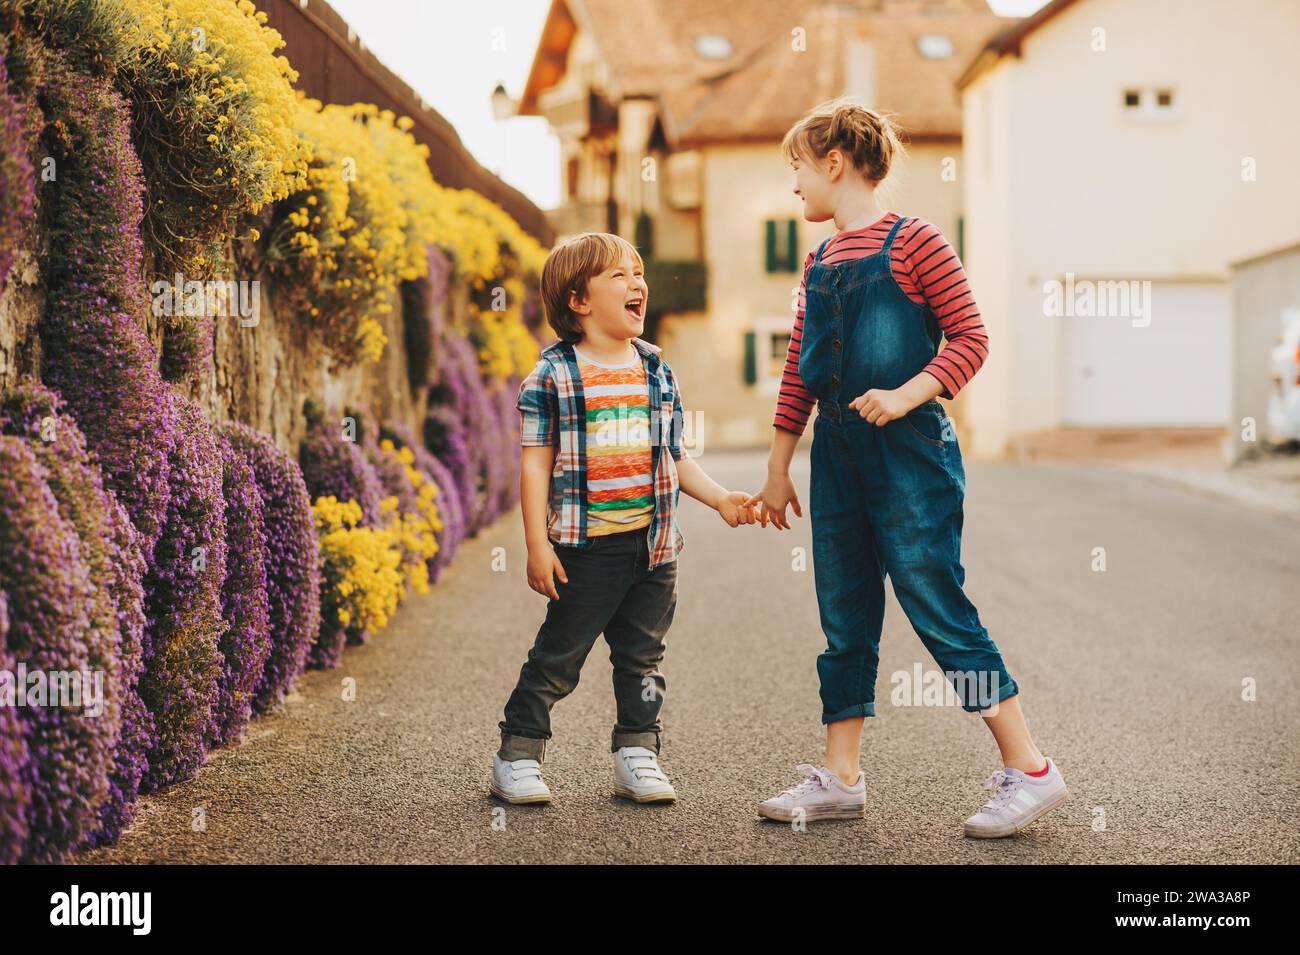 Two cute happy young kids playing together outdoors on a nice sunny evening, holding hands. Small brother and big sister spending time together Stock Photo